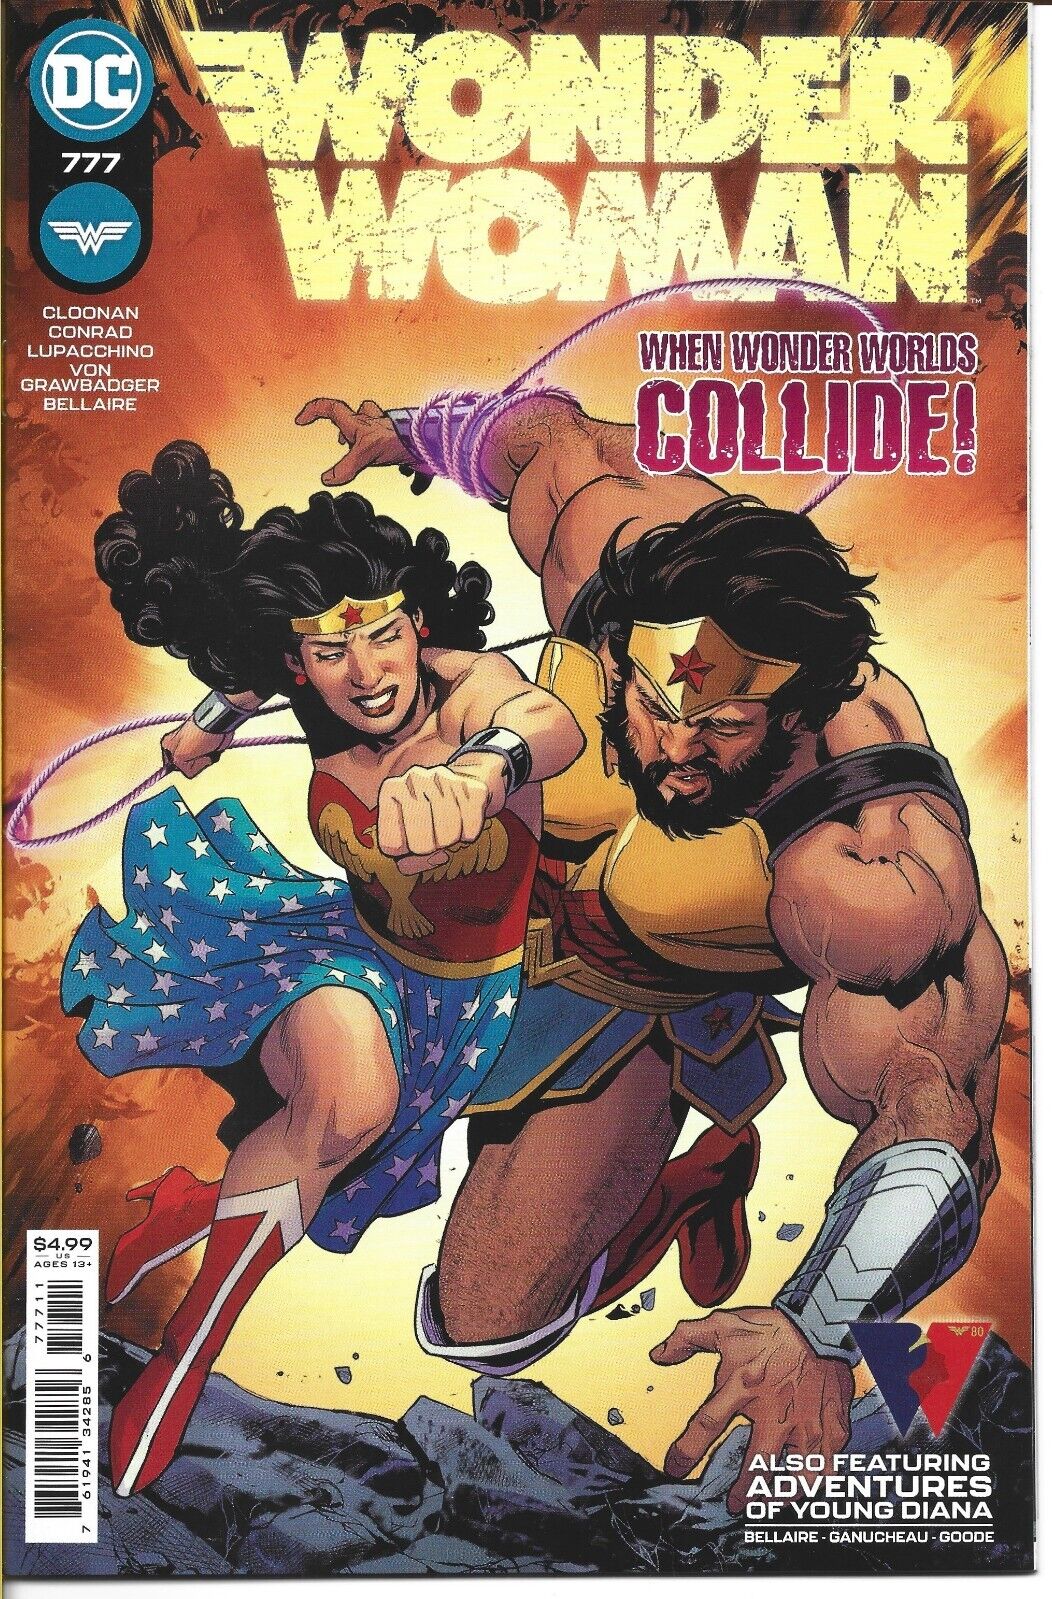 WONDER WOMAN #777 DC COMICS 2021 BAGGED AND BOARDED